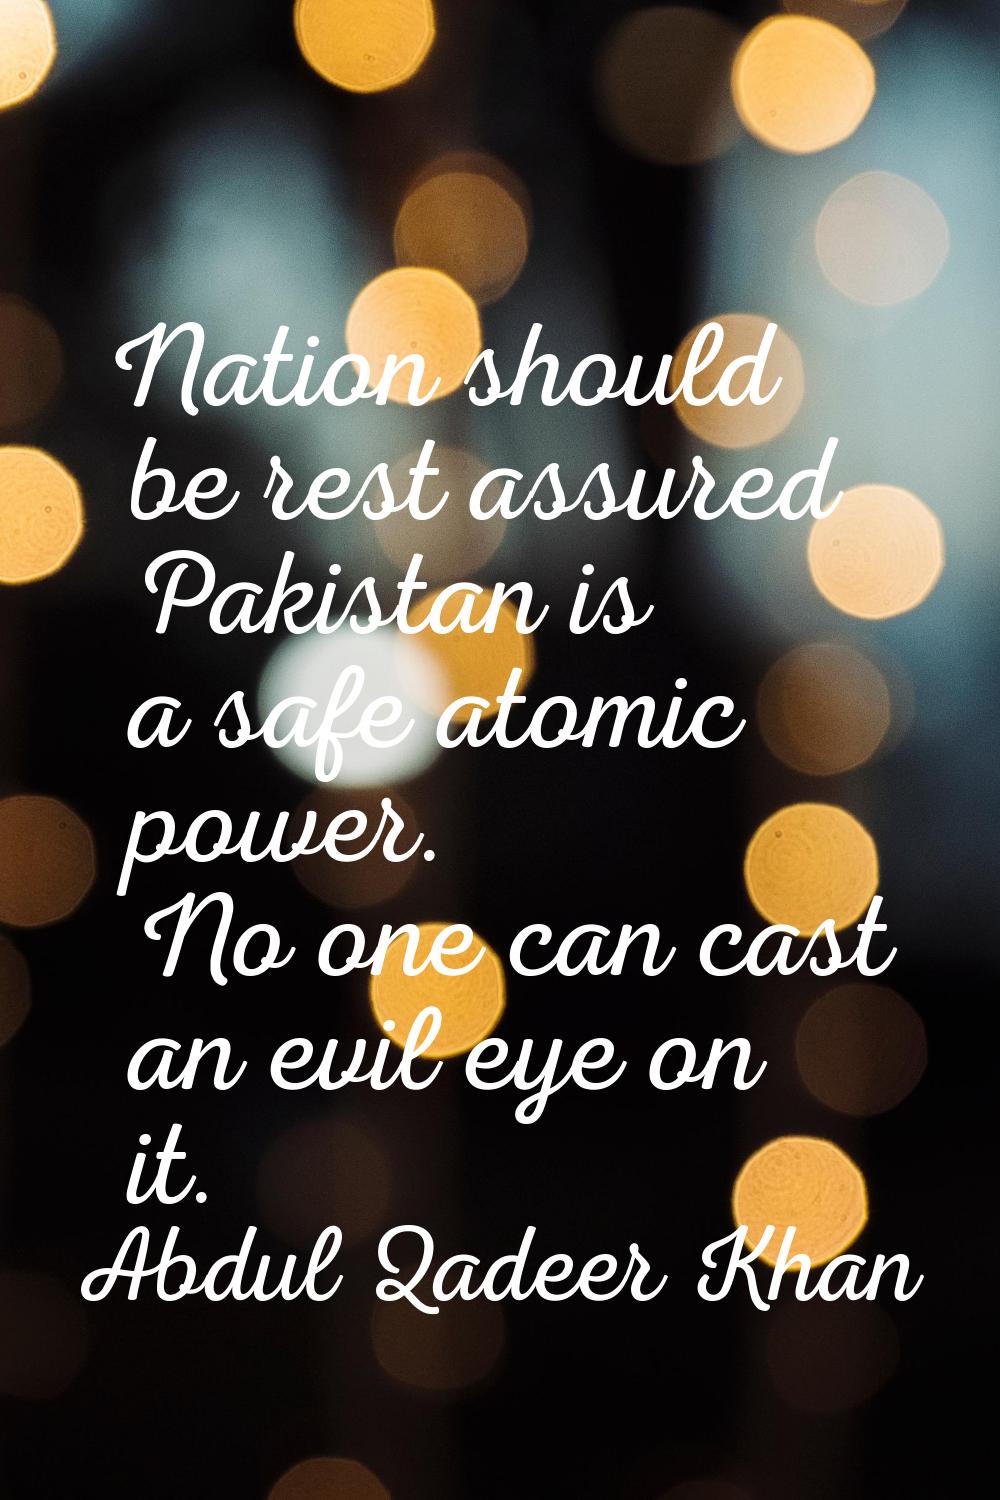 Nation should be rest assured Pakistan is a safe atomic power. No one can cast an evil eye on it.